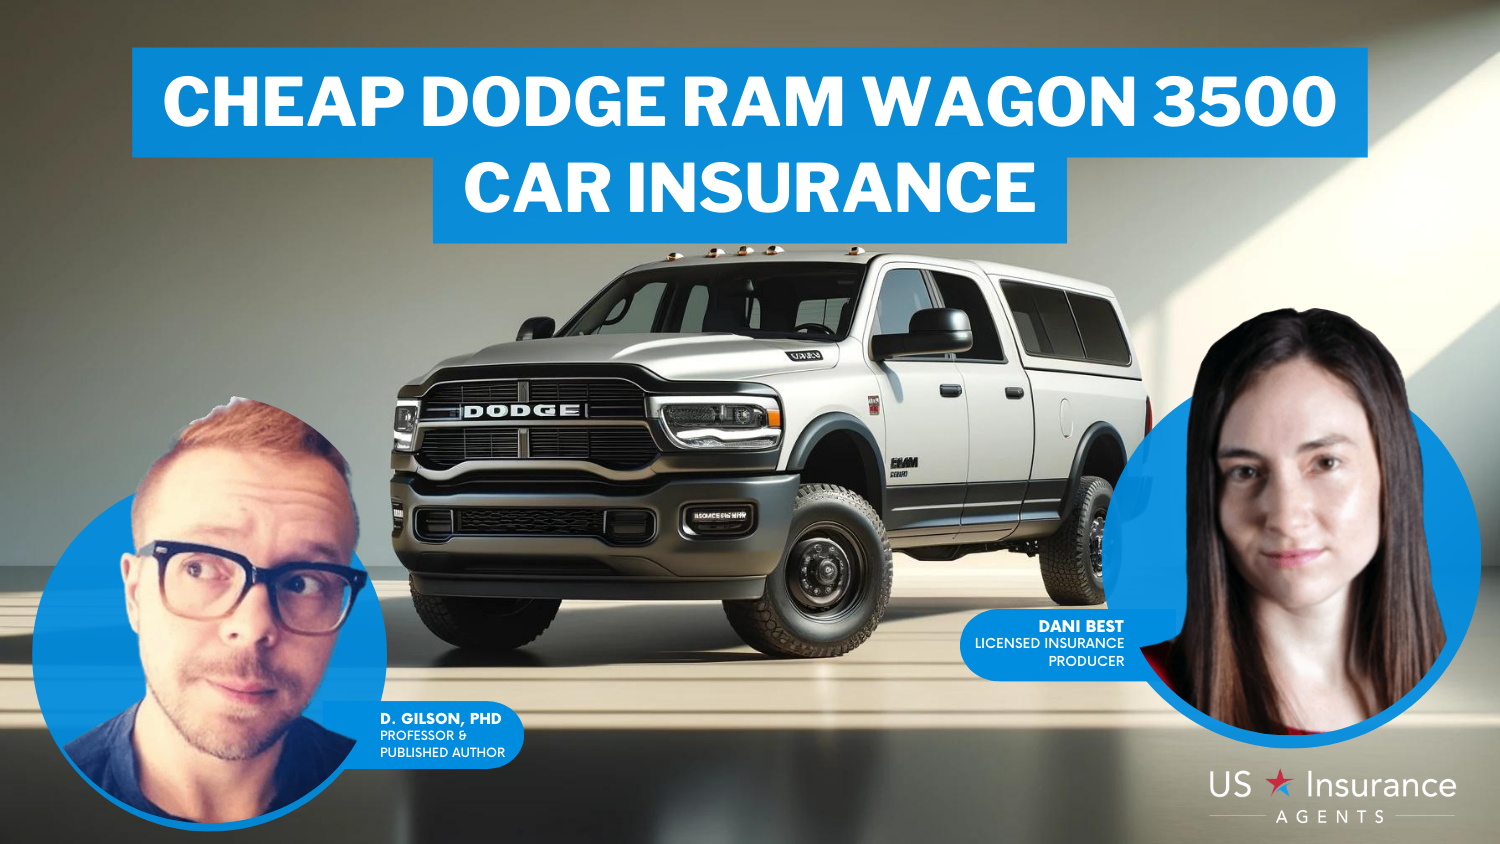 Cheap Dodge Ram Wagon 3500 Car Insurance: Auto-Owners, State Farm, and Nationwide